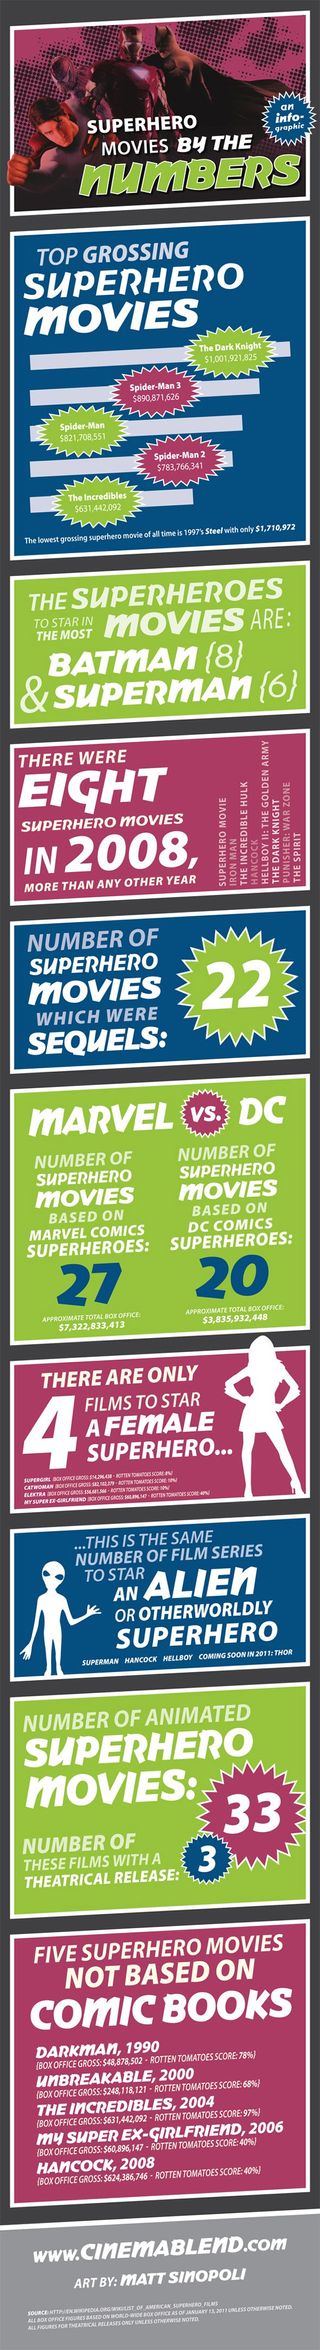 superhero movies by the numbers infographic